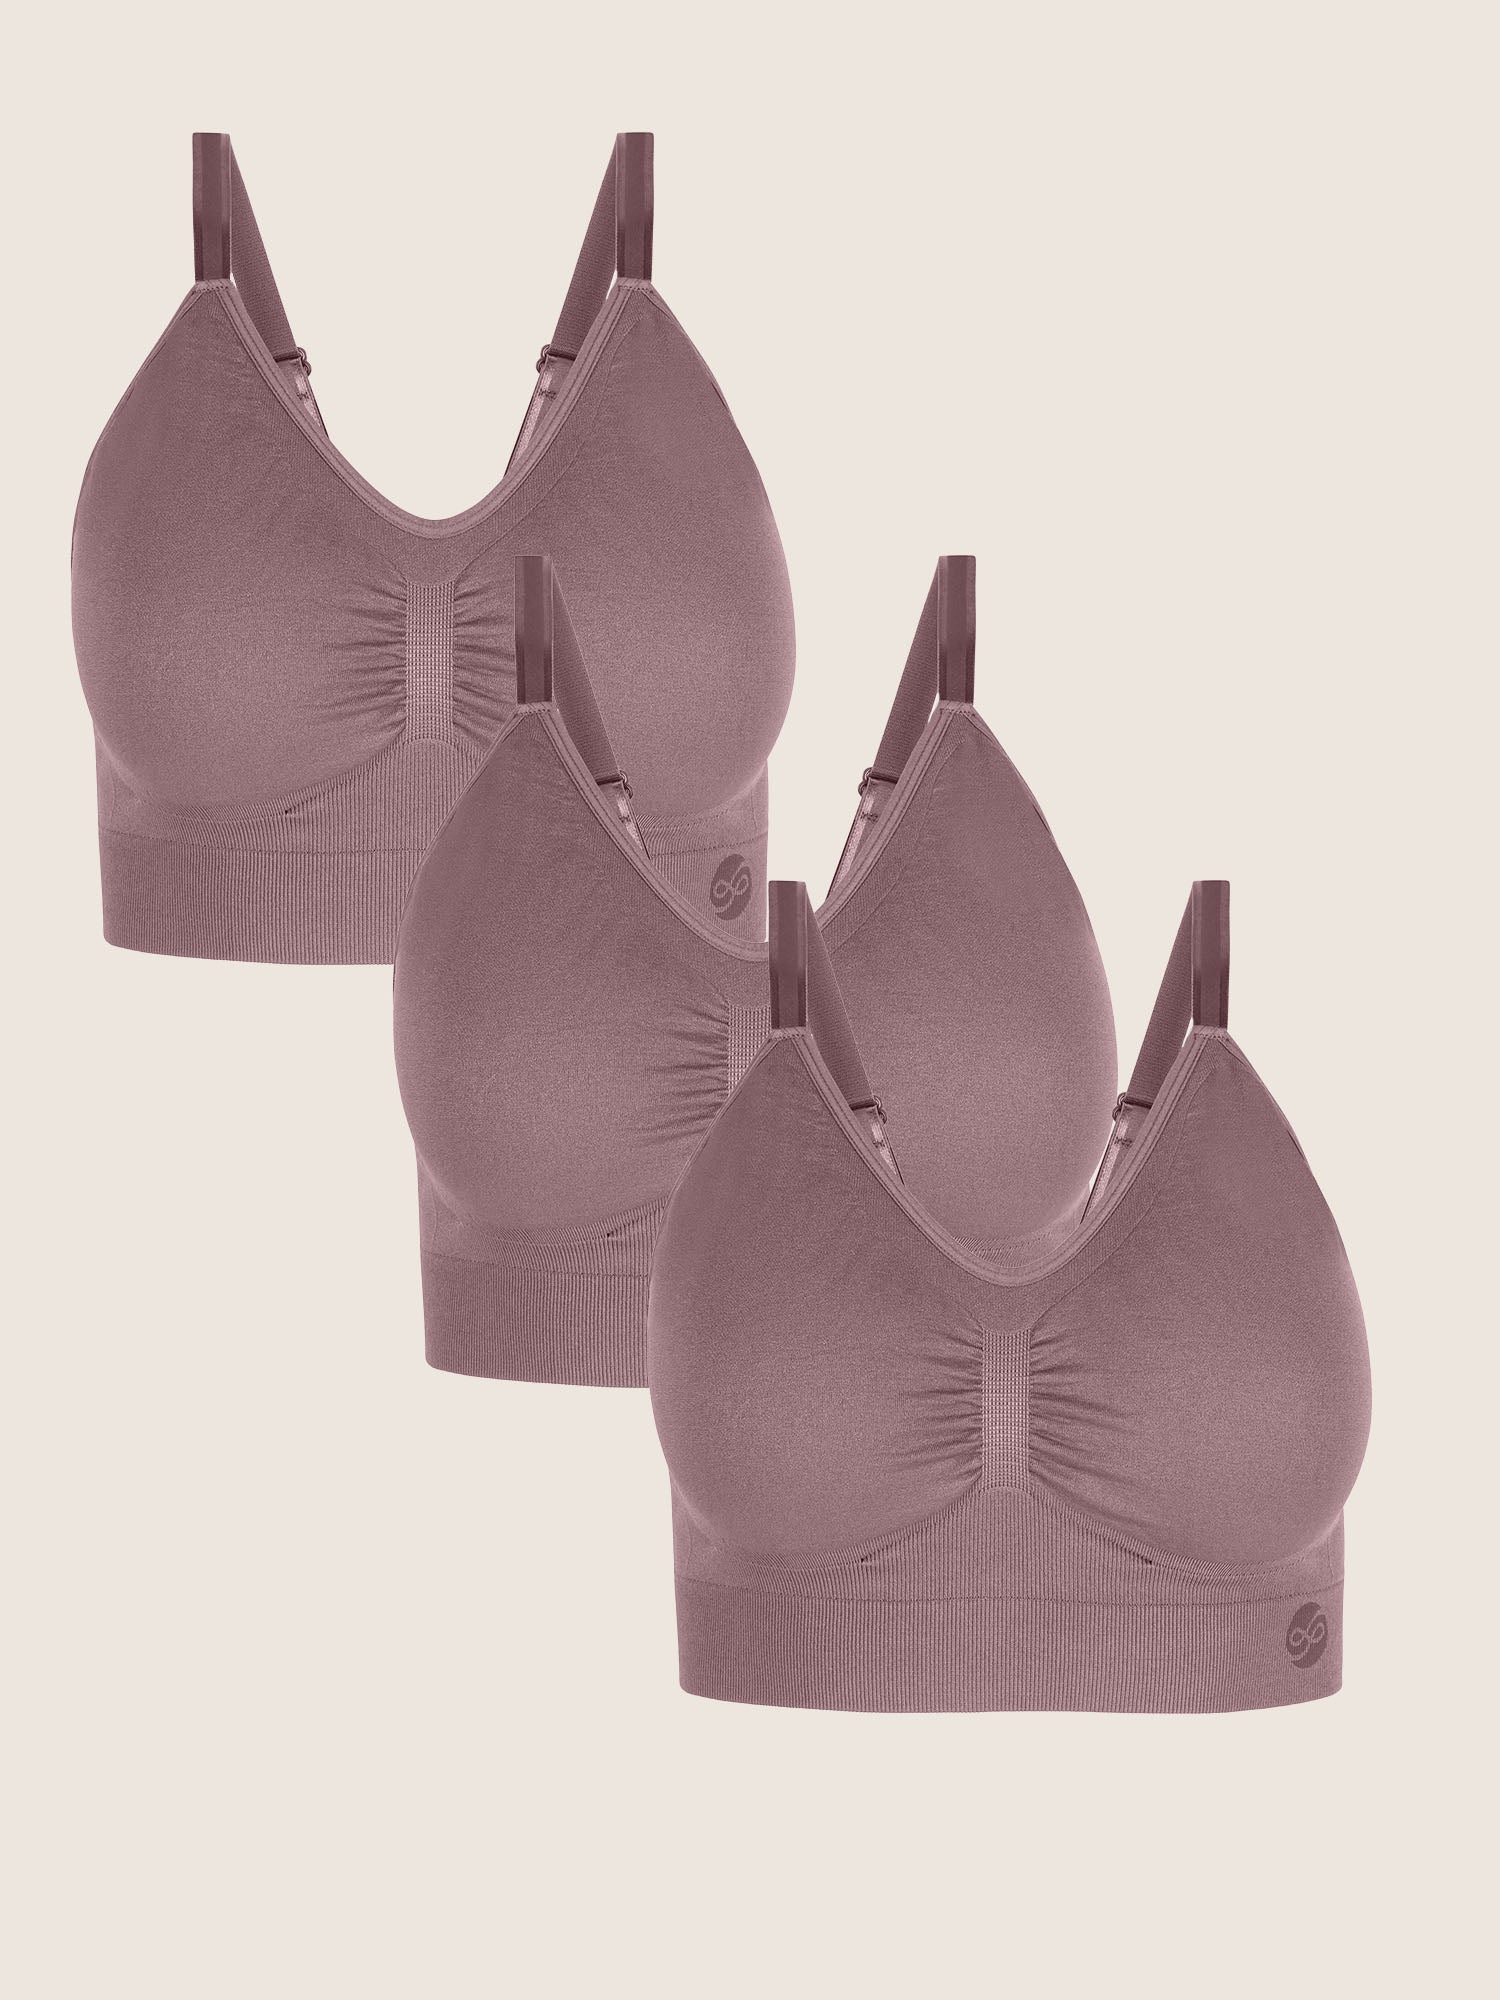 Davy Piper: Stock up and save with the Nellie Bra Bundle.